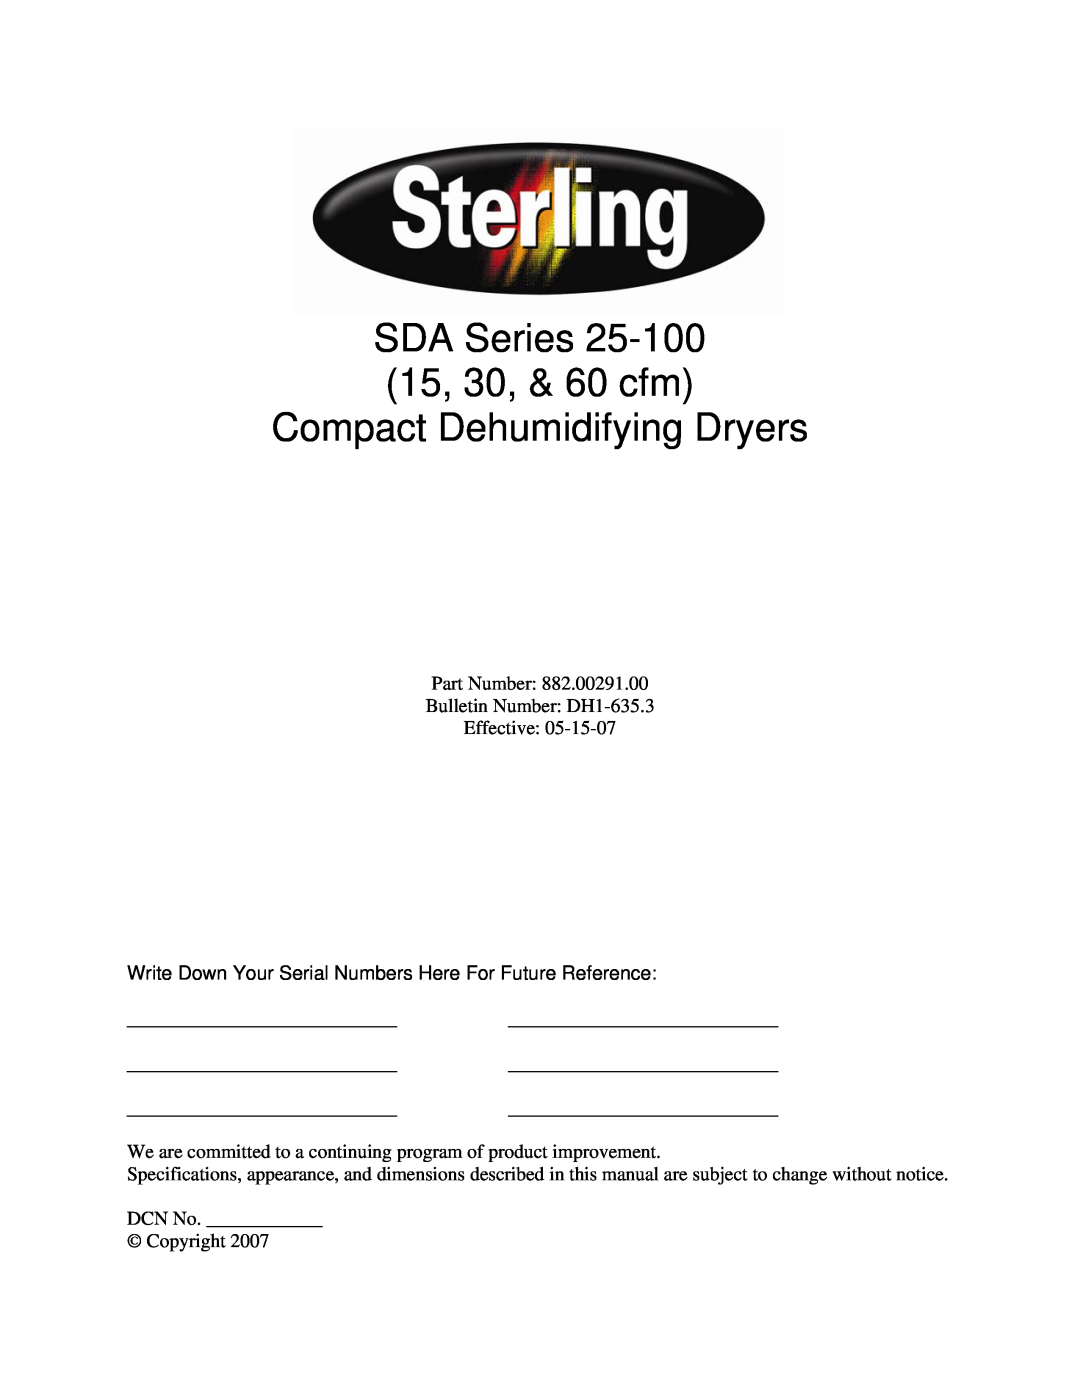 Sterling 30 cfm specifications SDA Series 15, 30, & 60 cfm Compact Dehumidifying Dryers, DCN No Copyright 